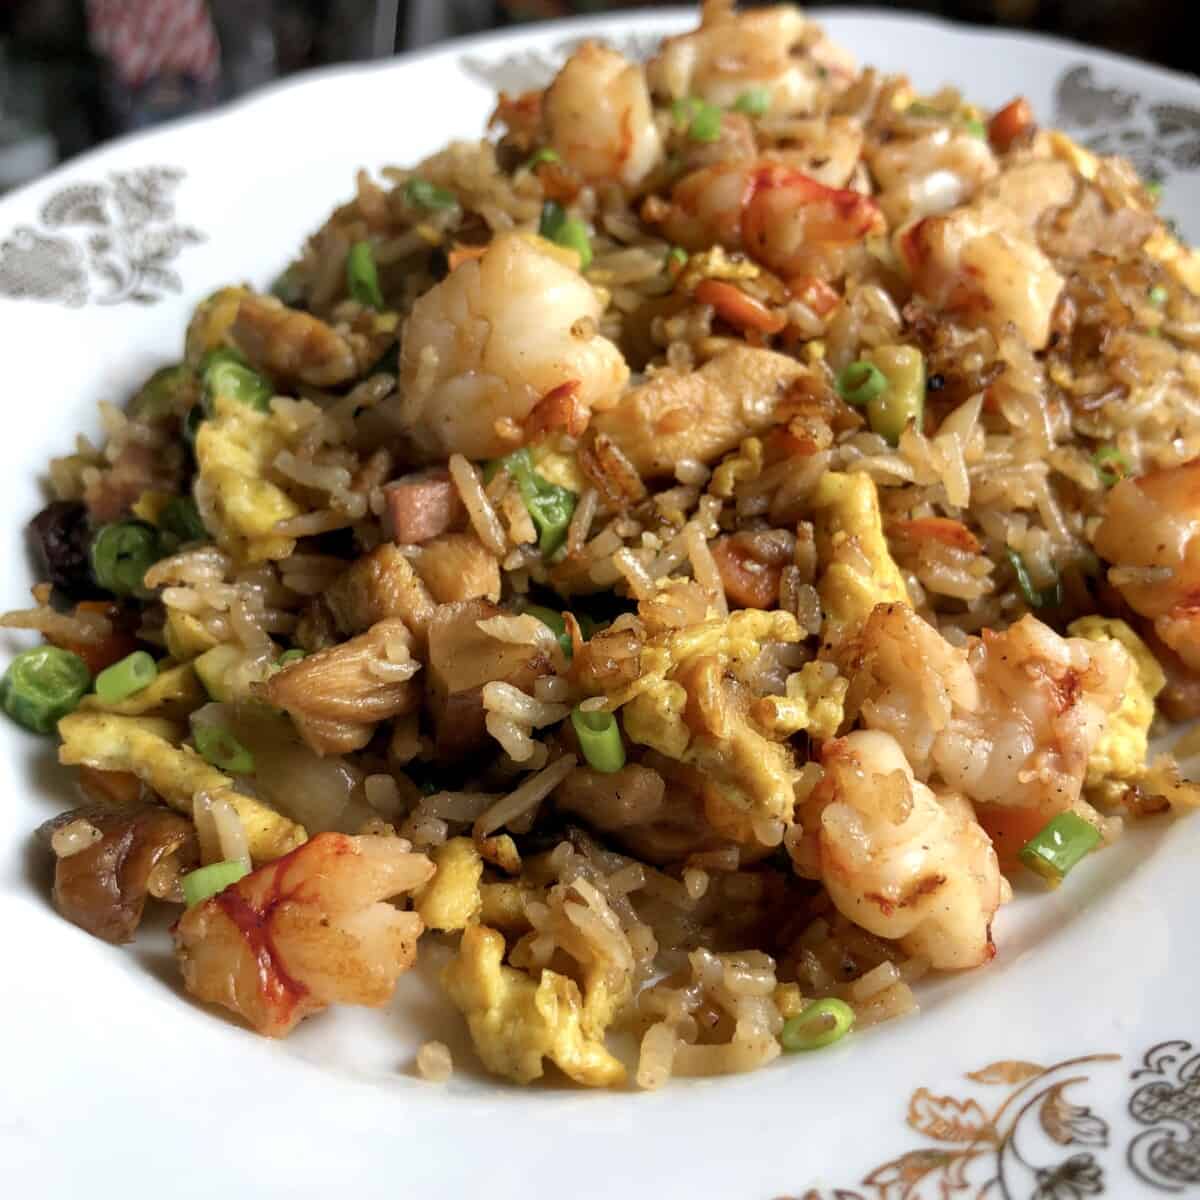 An oval serving platter with Yangzhou House special fried rice filled with shrimp, chicken, ham, egg, and vegetables.